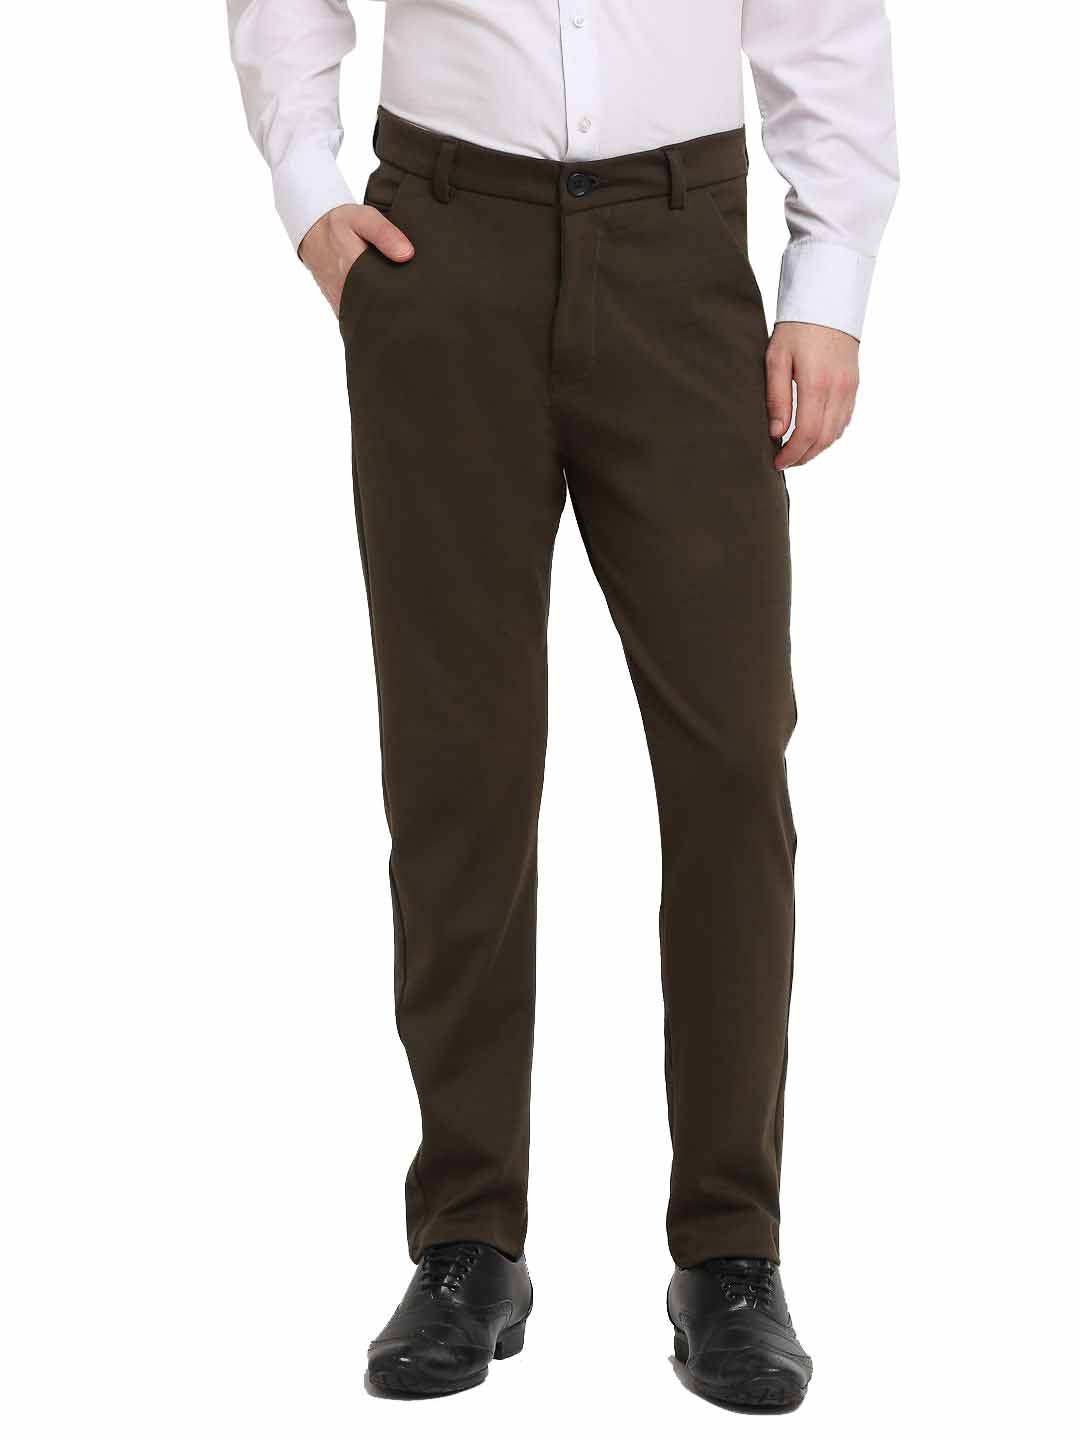 Mens Slim Fitting Lycra Business Casual Pants Soft, Elastic, And Perfect  For Business And Leisure In Autumn And Winter From Kirke, $22.1 | DHgate.Com